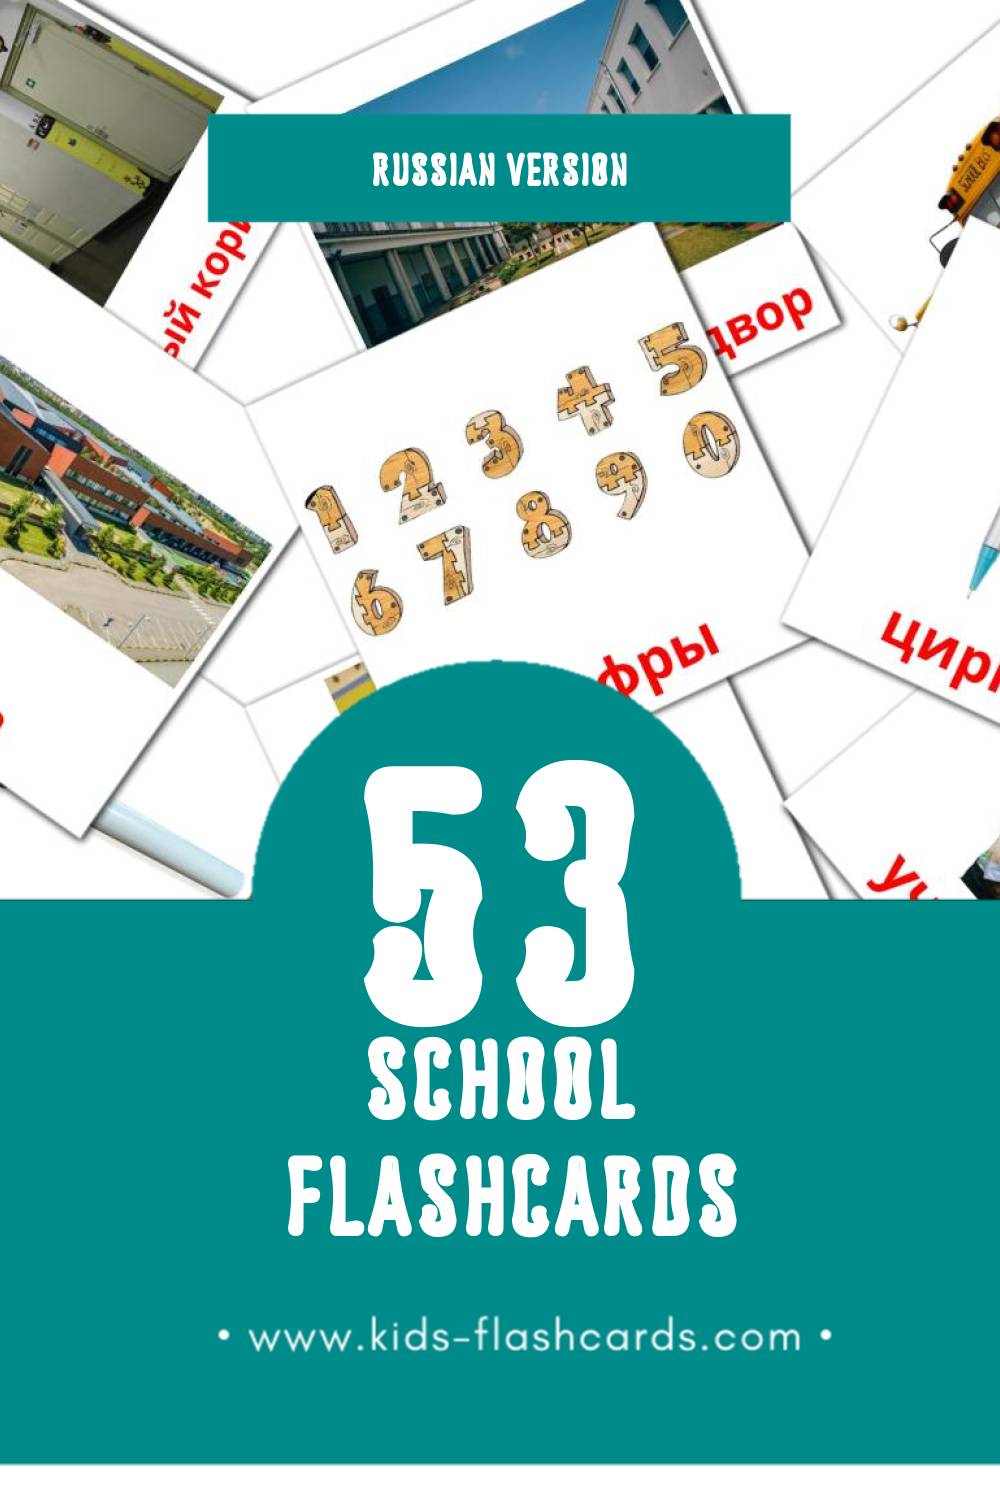 Visual Школа Flashcards for Toddlers (53 cards in Russian)